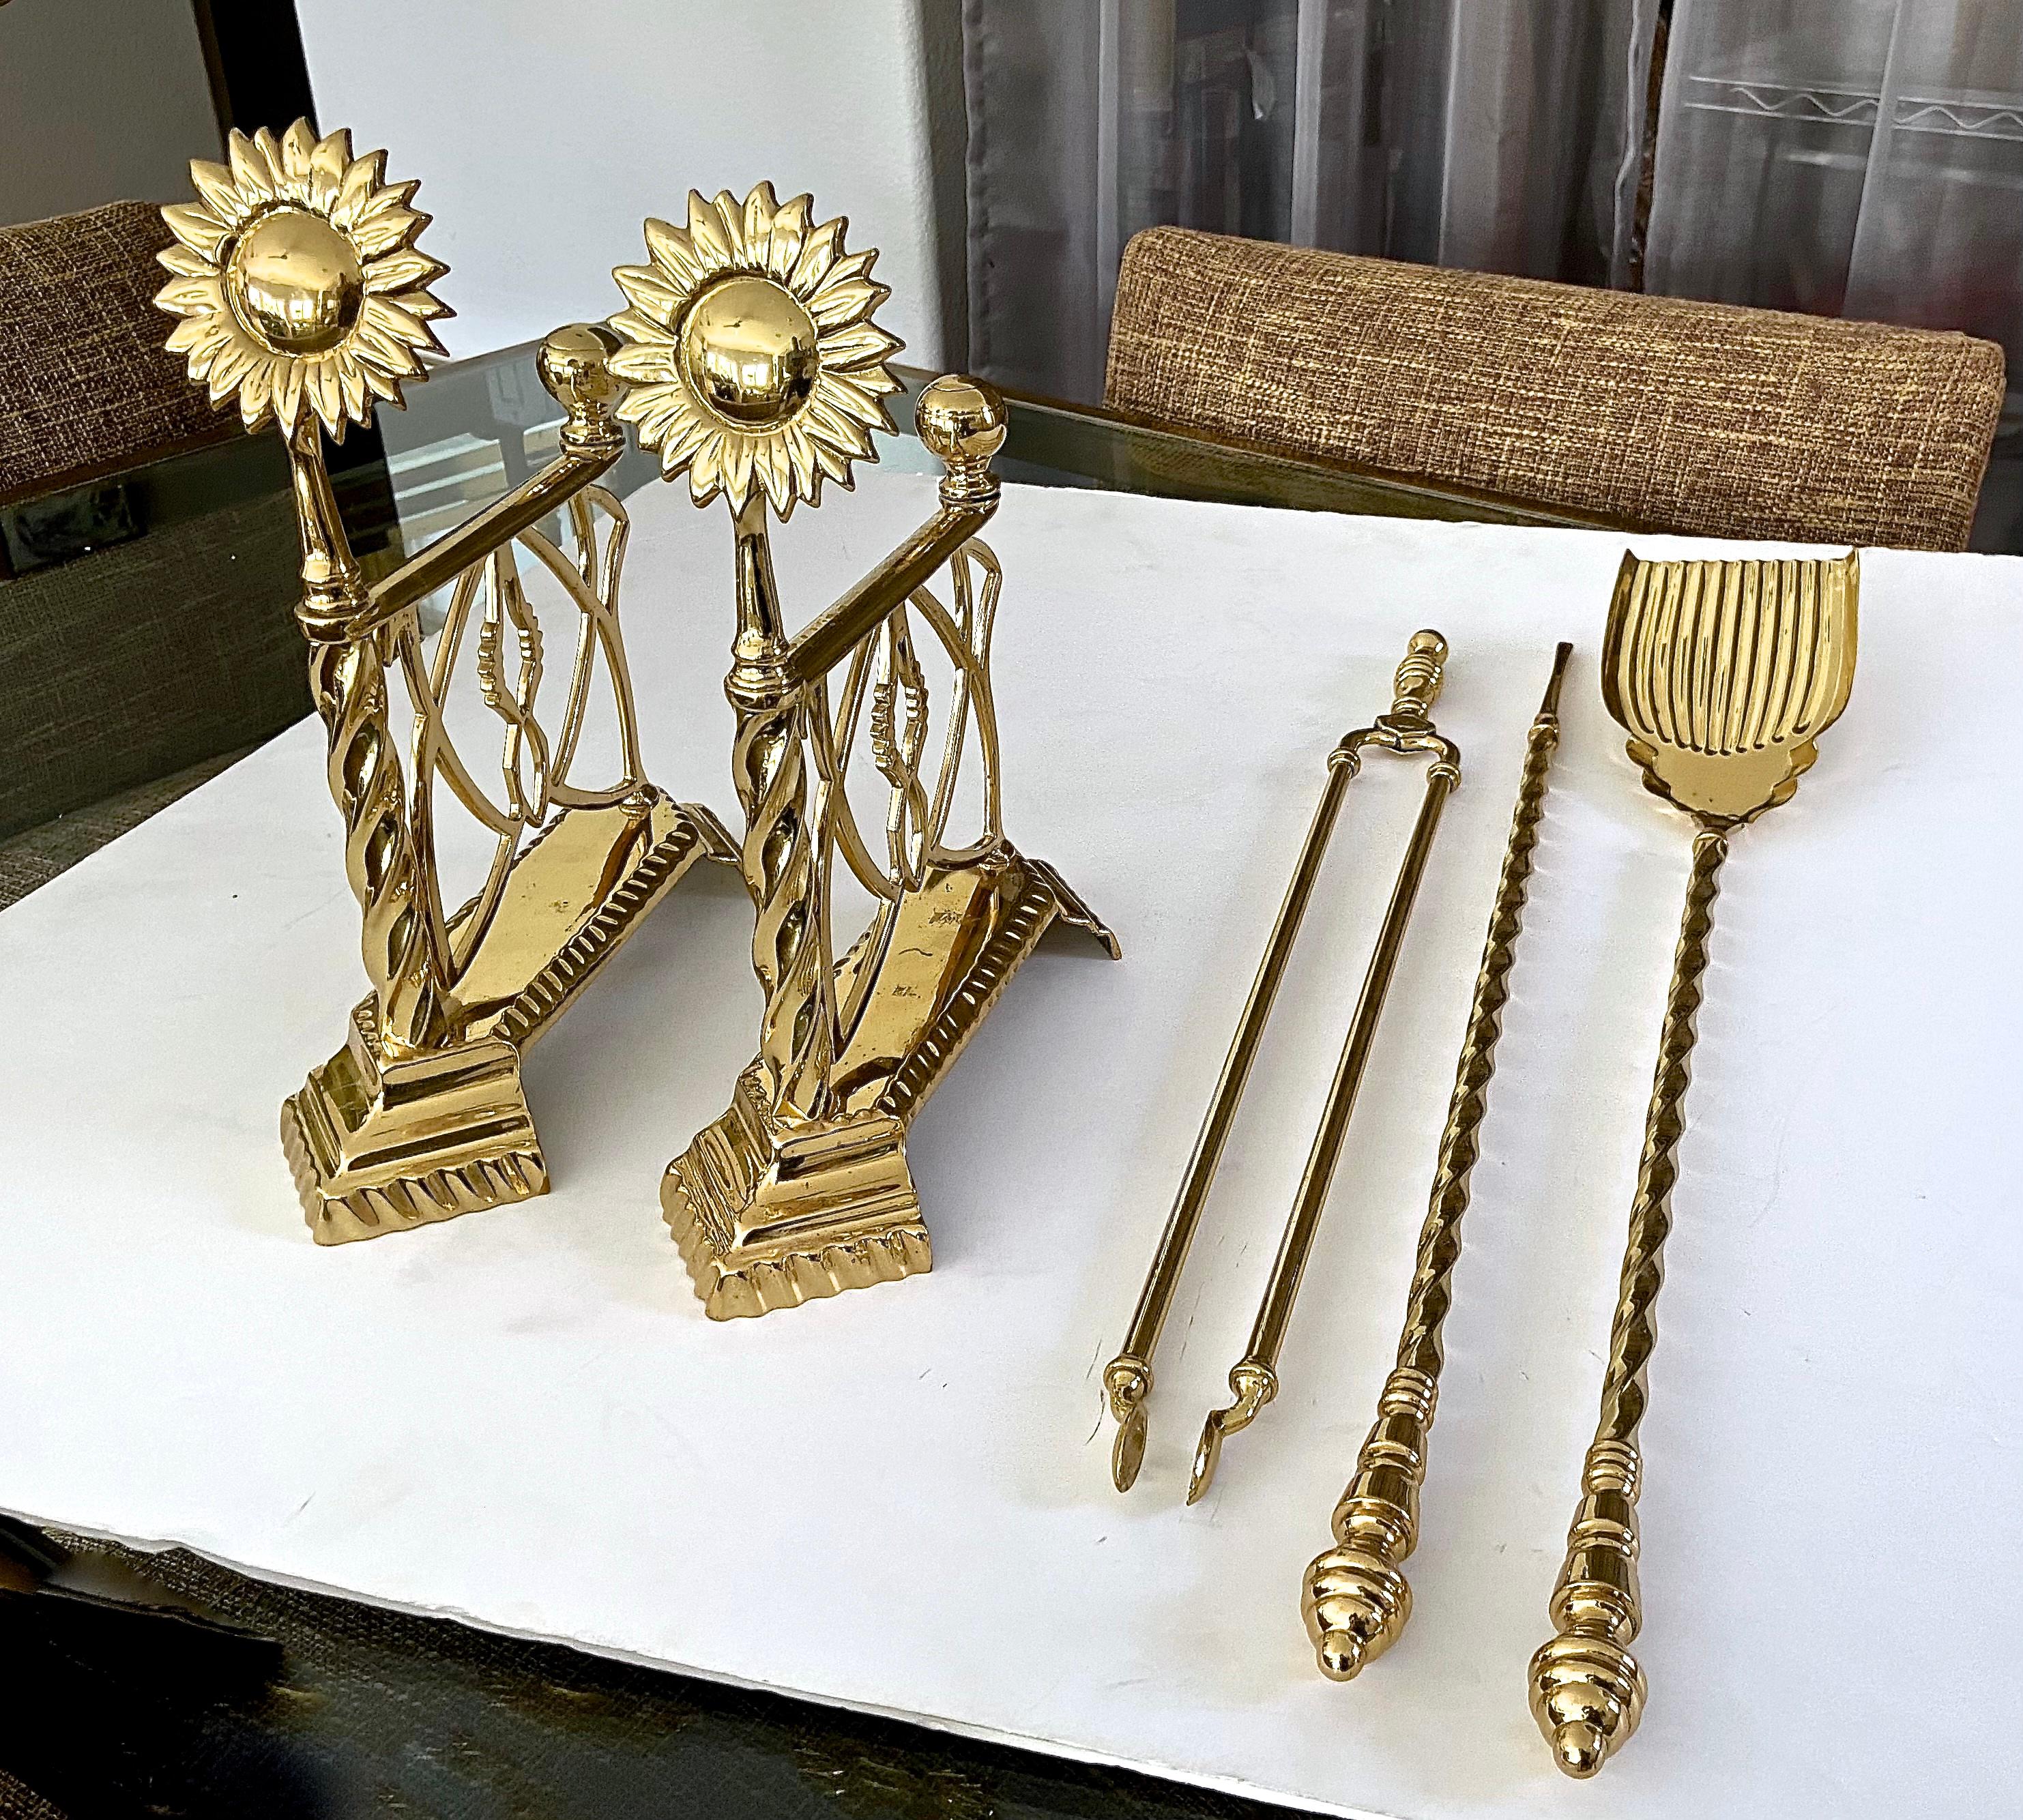 Aesthetic English style andirons fireplace set including andirons and 3 tools (no stand), The andirons have a sunflower motif and superior quality throughout. Brass is excellent shinning condition (possibly new old stock). 
Andirons: 13